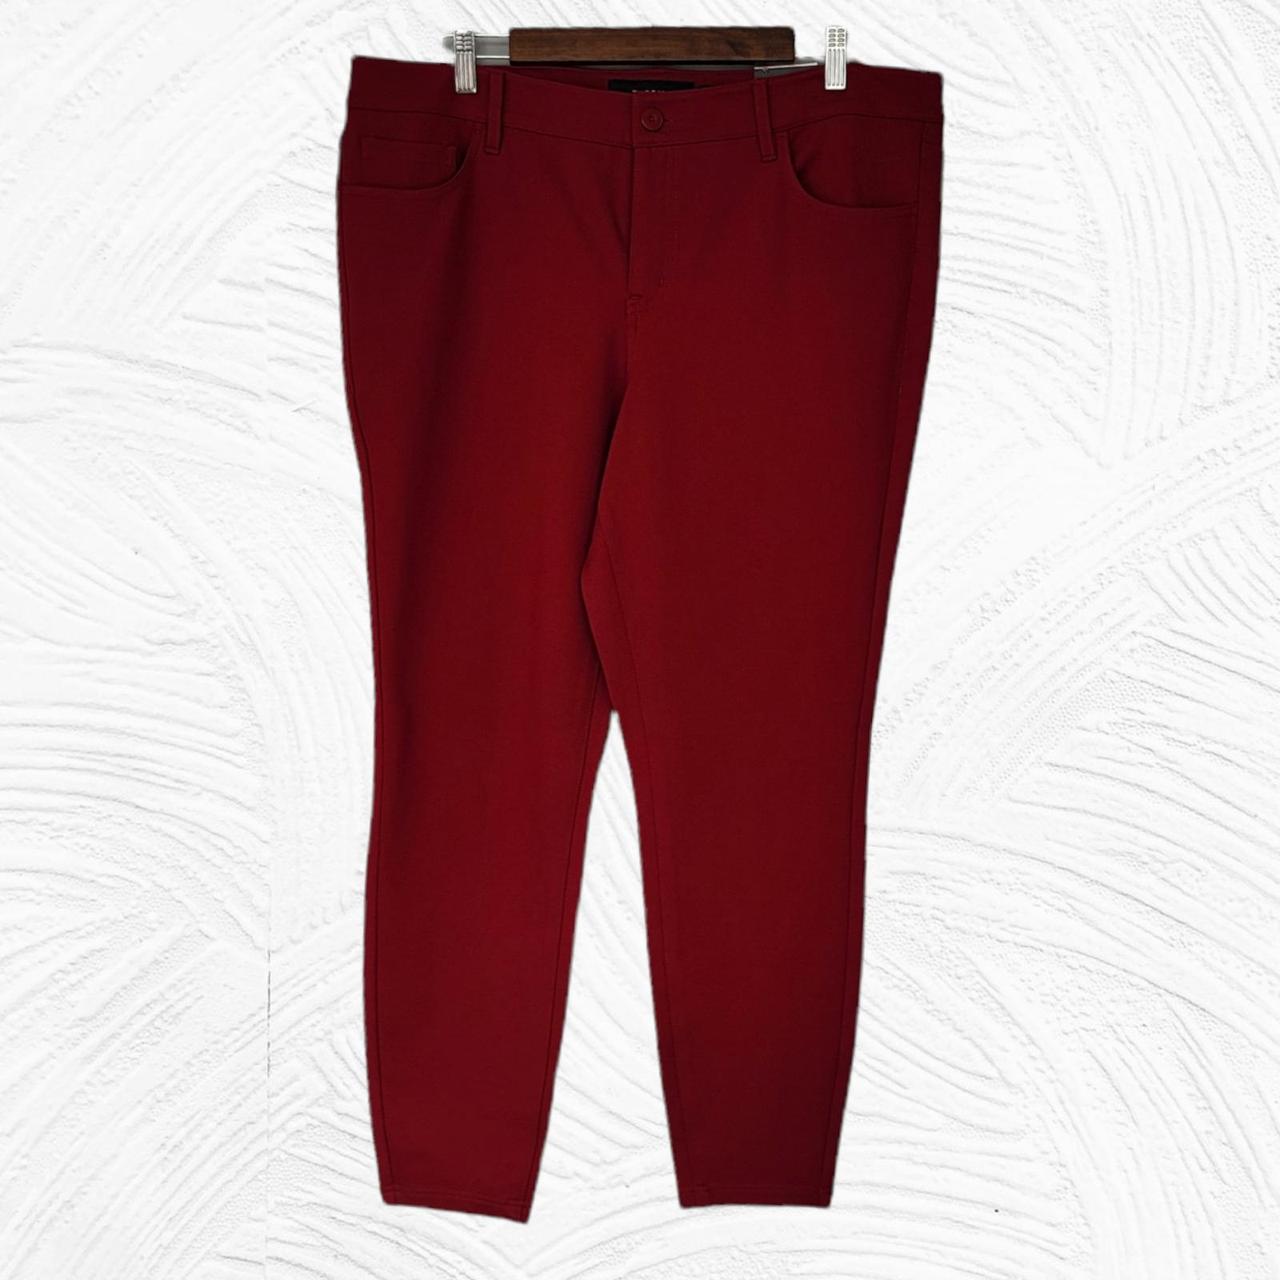 Amazon.com: PINSPARK Sweatpants Women Winter Fleece Lined Pants Casual  Baggy Jogger Trousers Elastic Waist Track Pant Pockets, Dark Red Small :  Clothing, Shoes & Jewelry